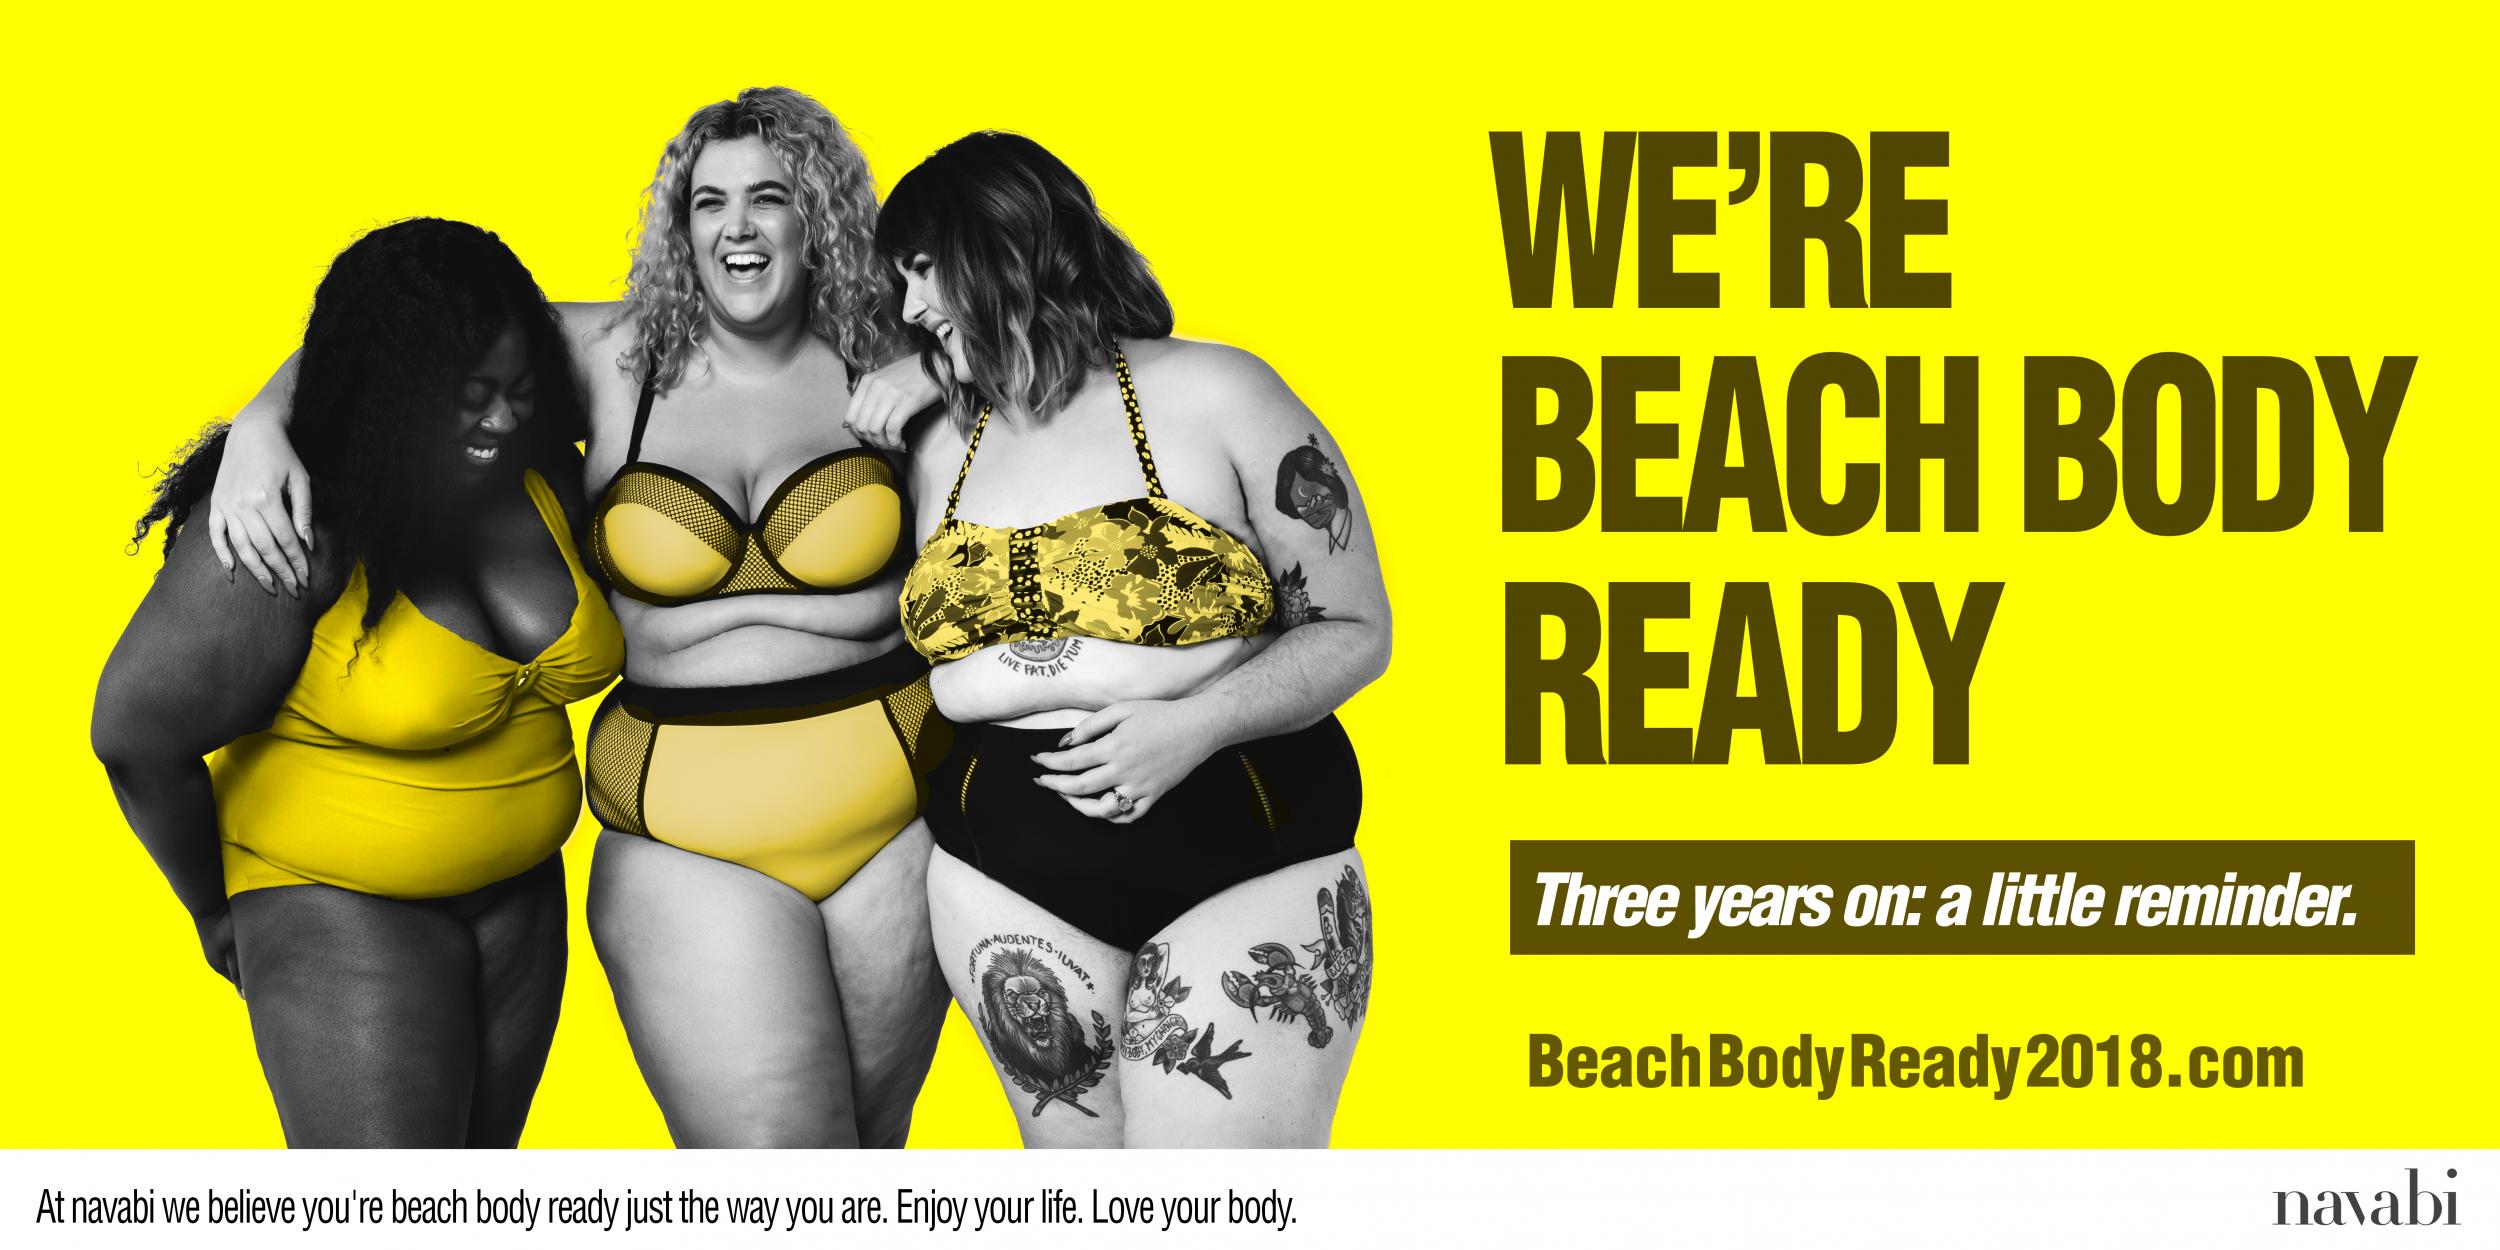 Plus-size fashion brand navabi has transformed the Protein World 'Beach Body' advert into a body positivity campaign